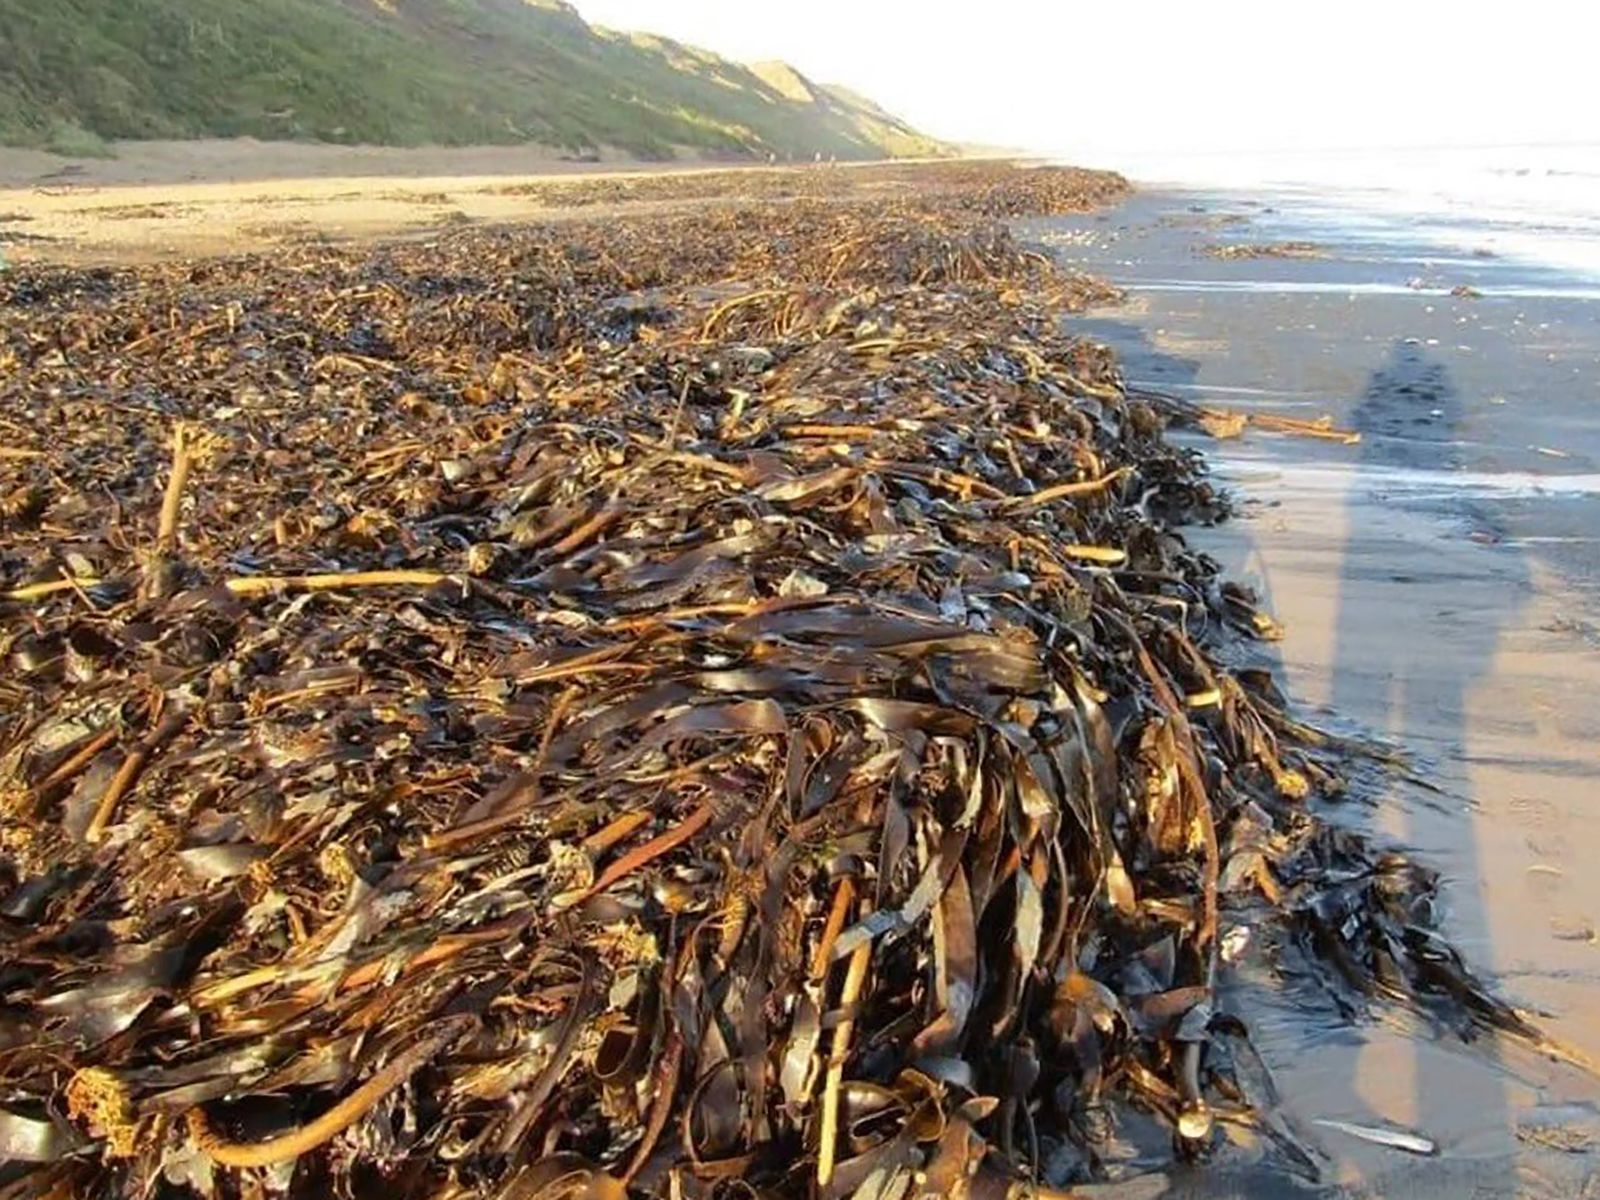 Thousands of dead sea creatures are washing up on UK beaches | CNN